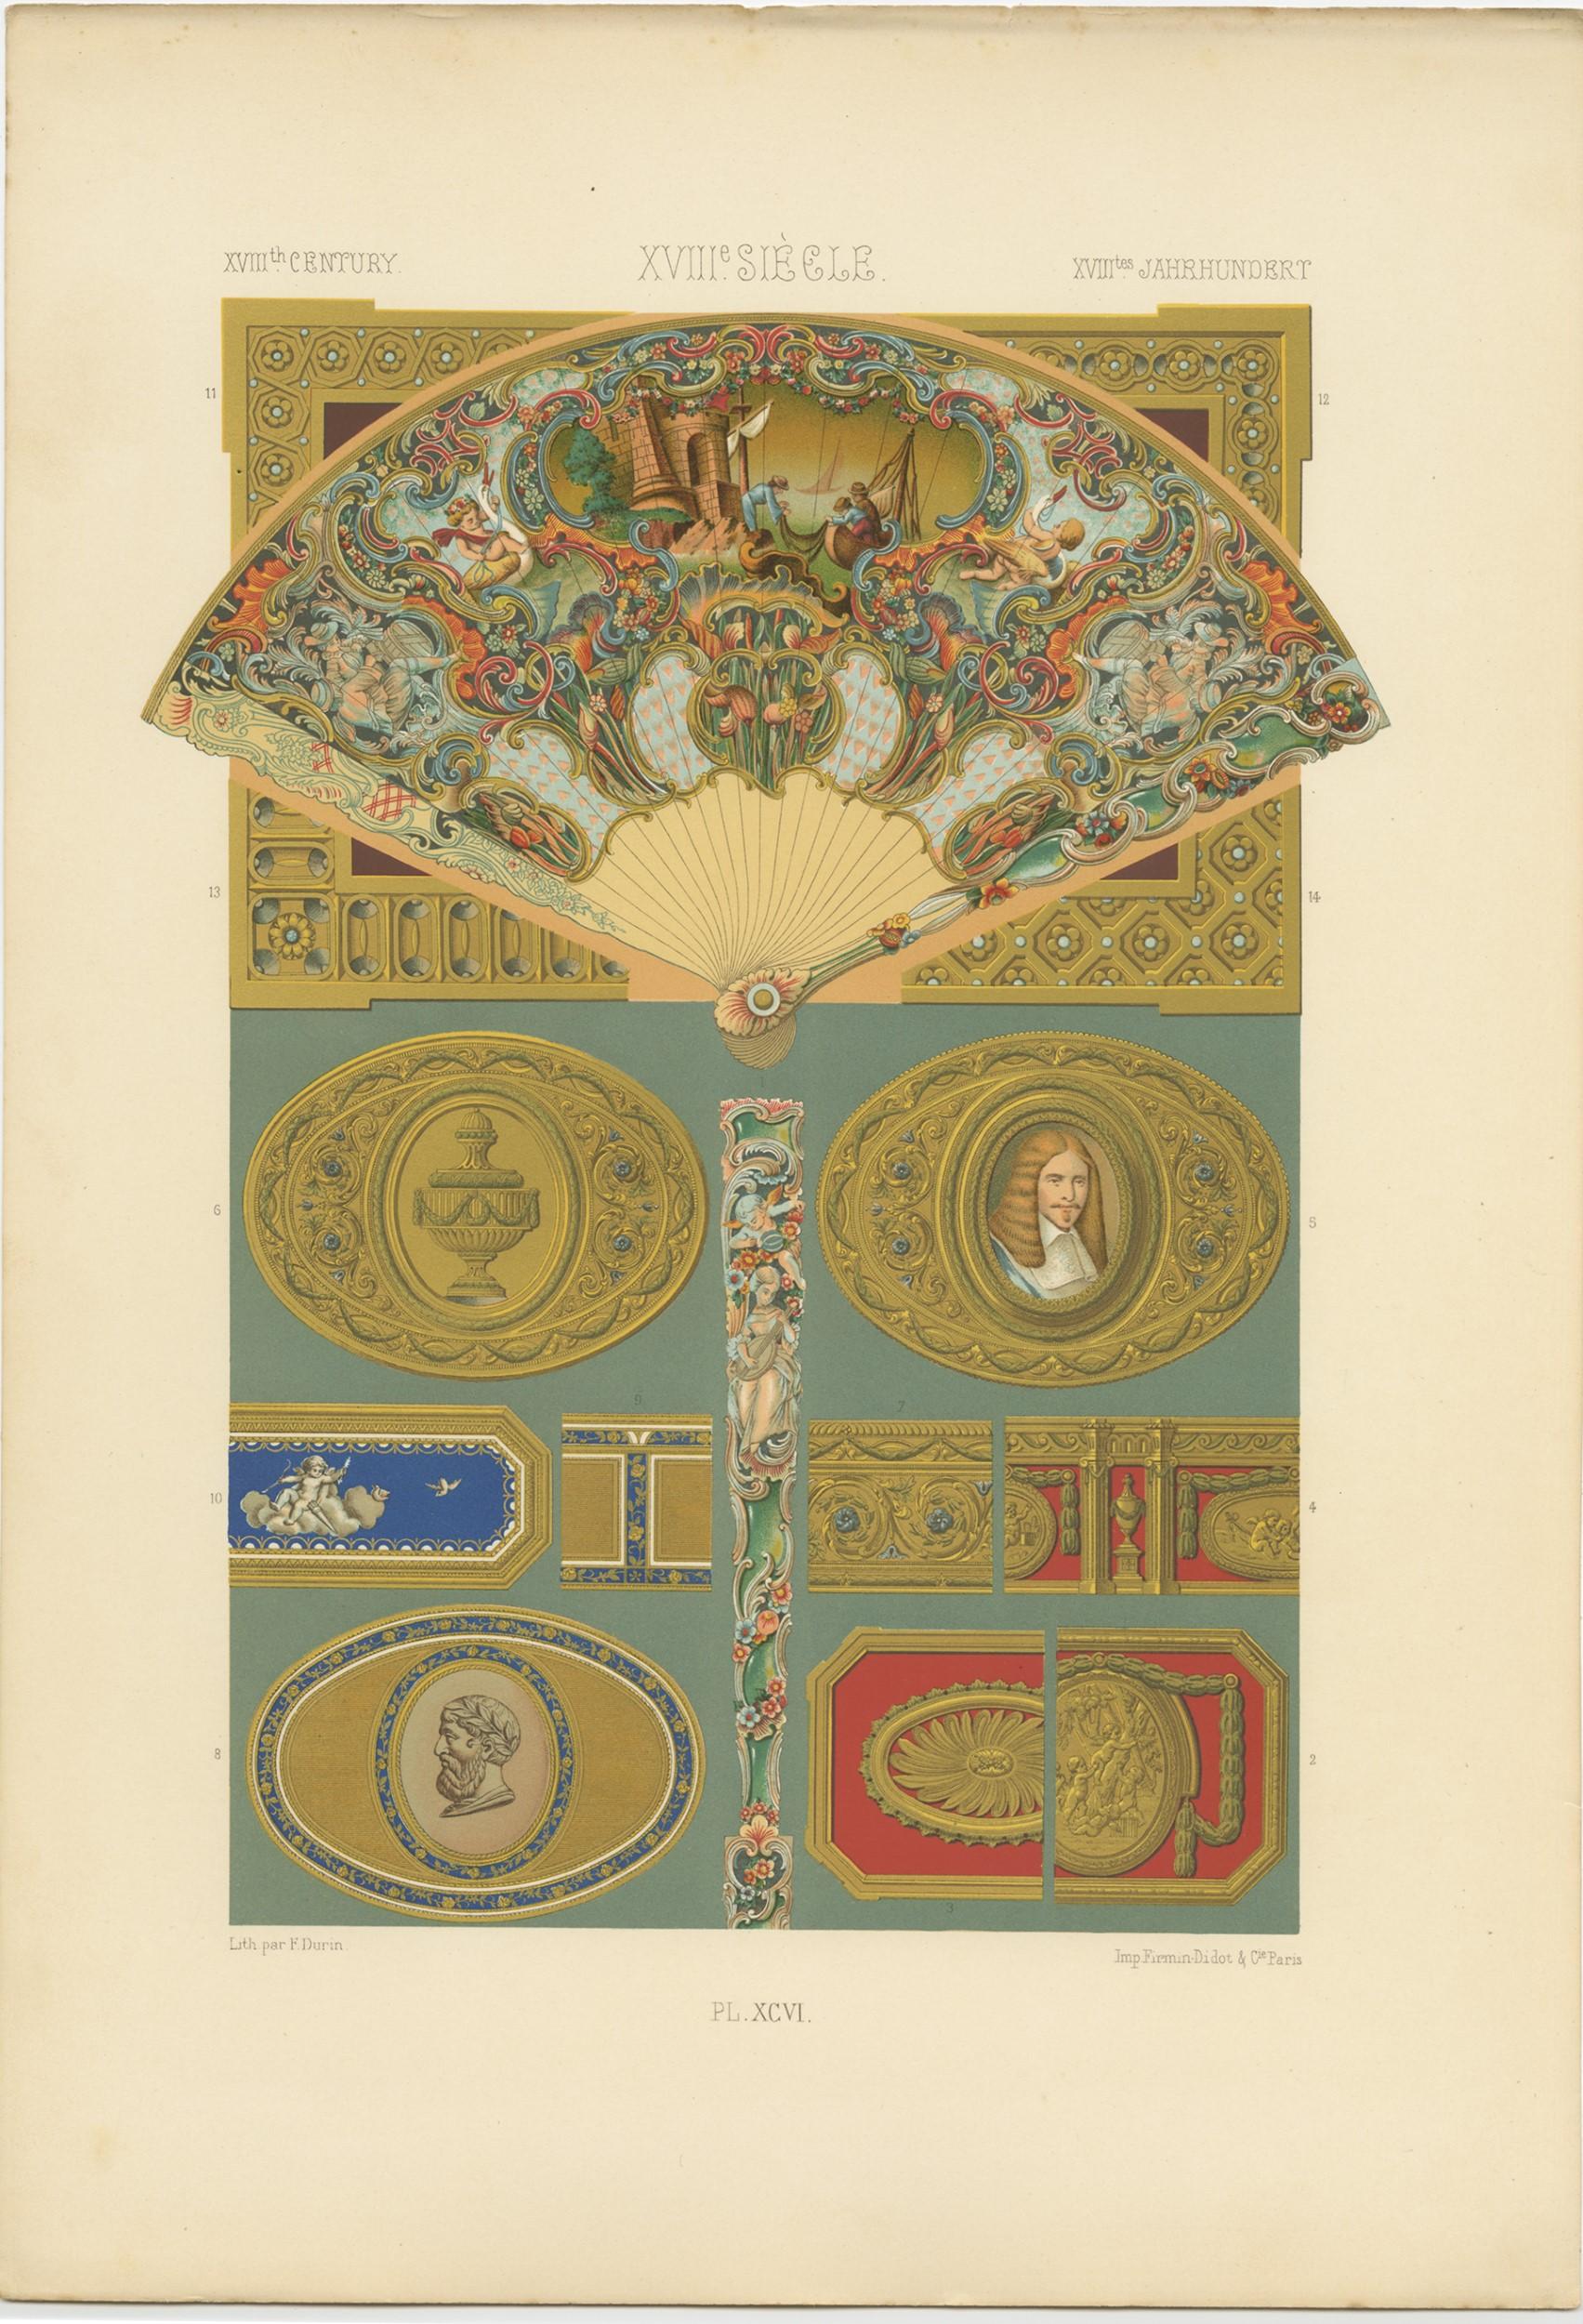 19th Century Pl. 96 Antique Print of XVIIIth Century Ornaments by Racinet (c.1890) For Sale